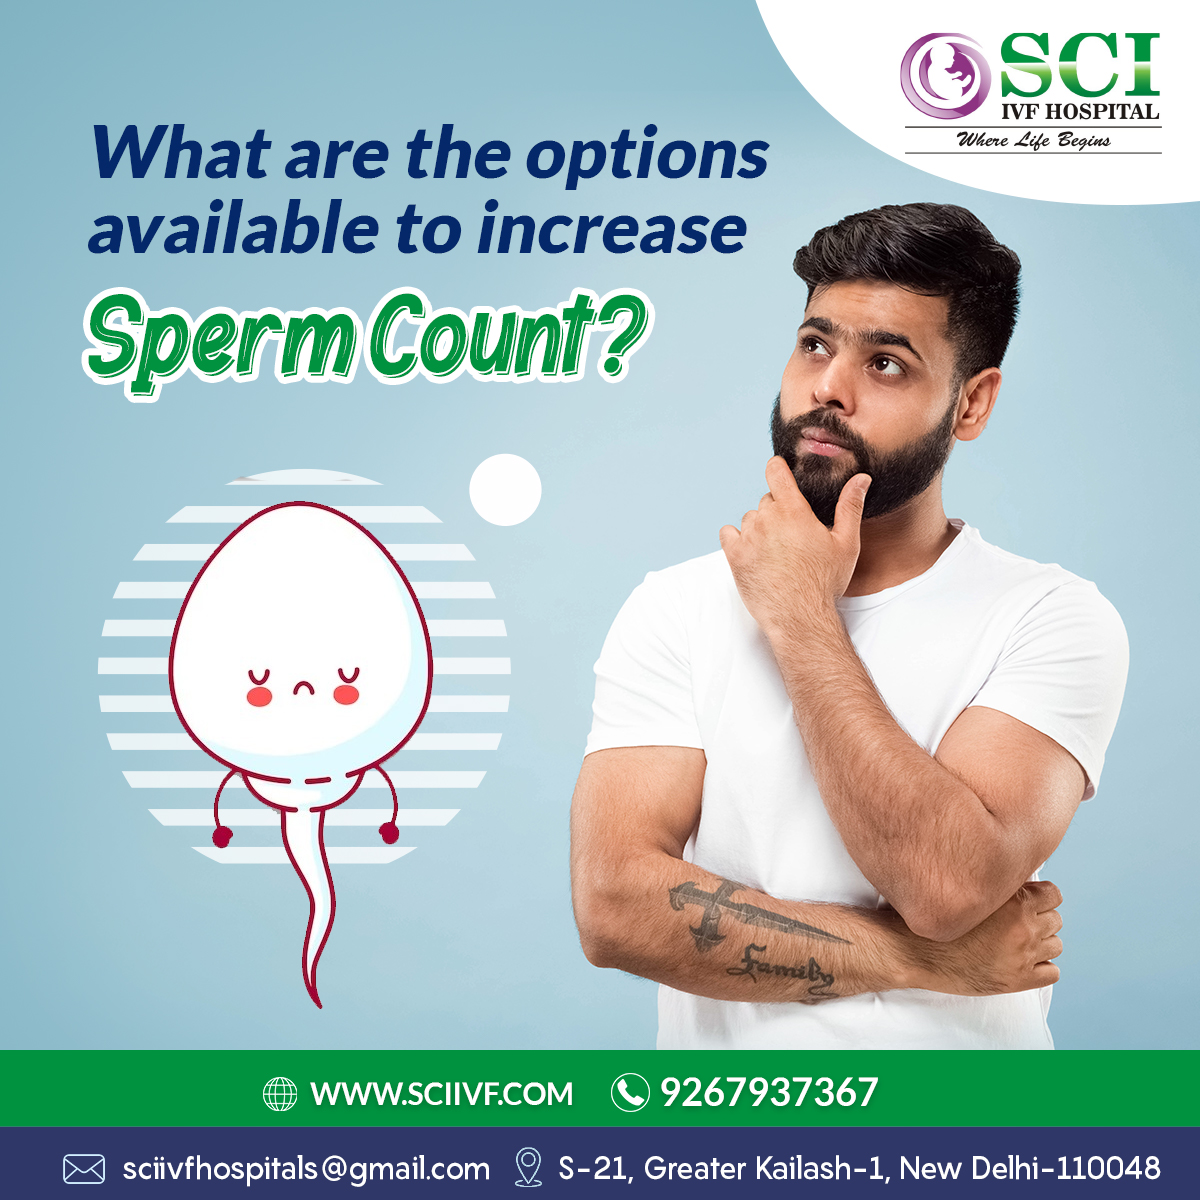 TIPS TO INCREASE SPERM COUNT